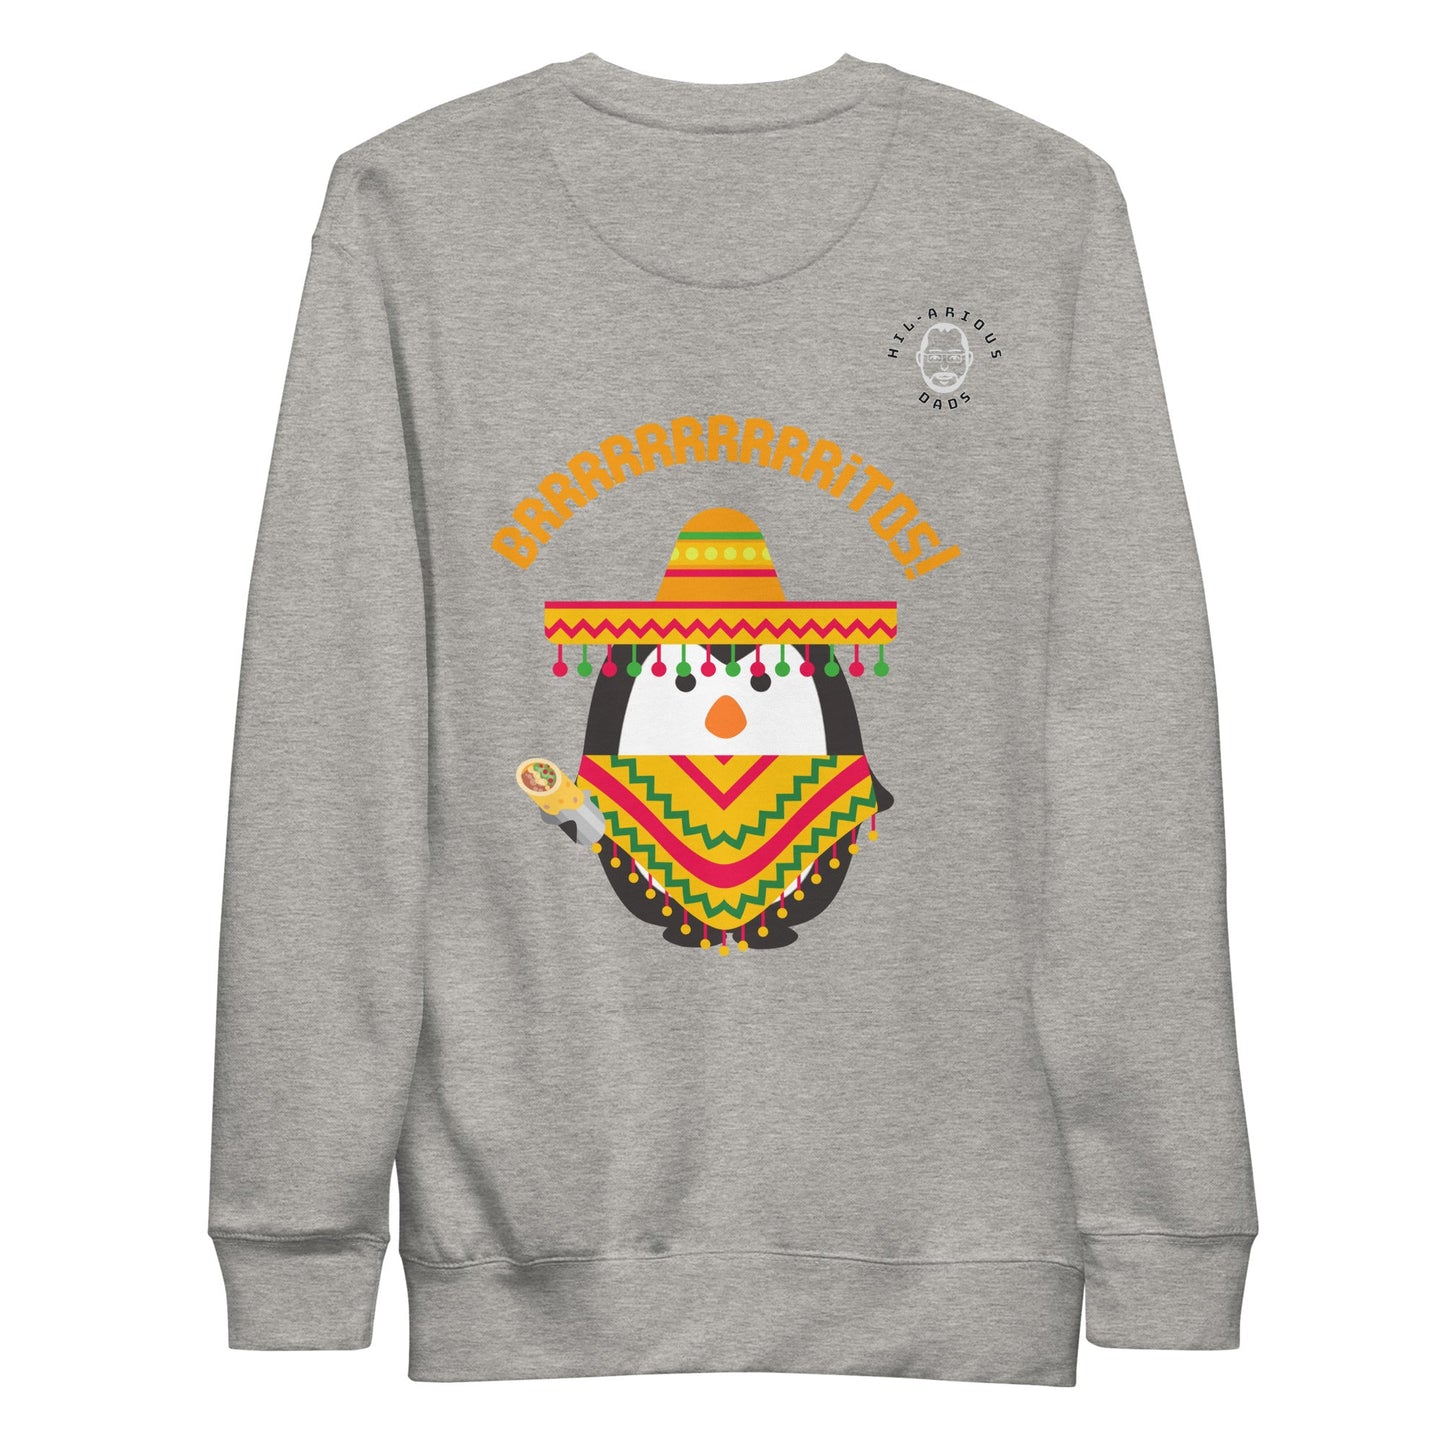 What do penguins like to eat during Cinco De Mayo?-Sweatshirt - Hil-arious Dads